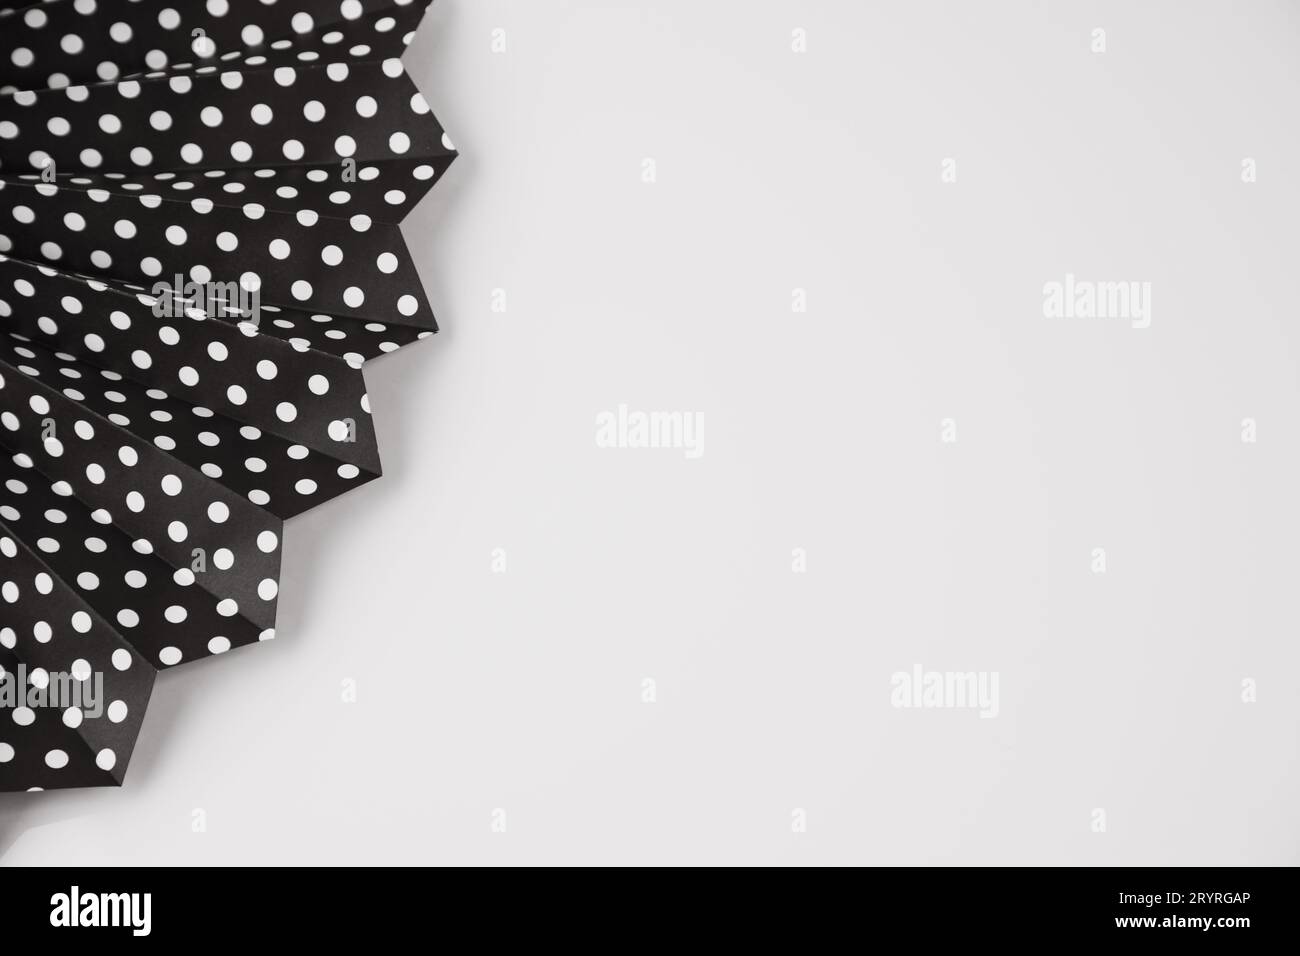 A close-up of a black and white polka dot dress lying on a flat surface such as a table, the fabric of the dress is in focus Stock Photo